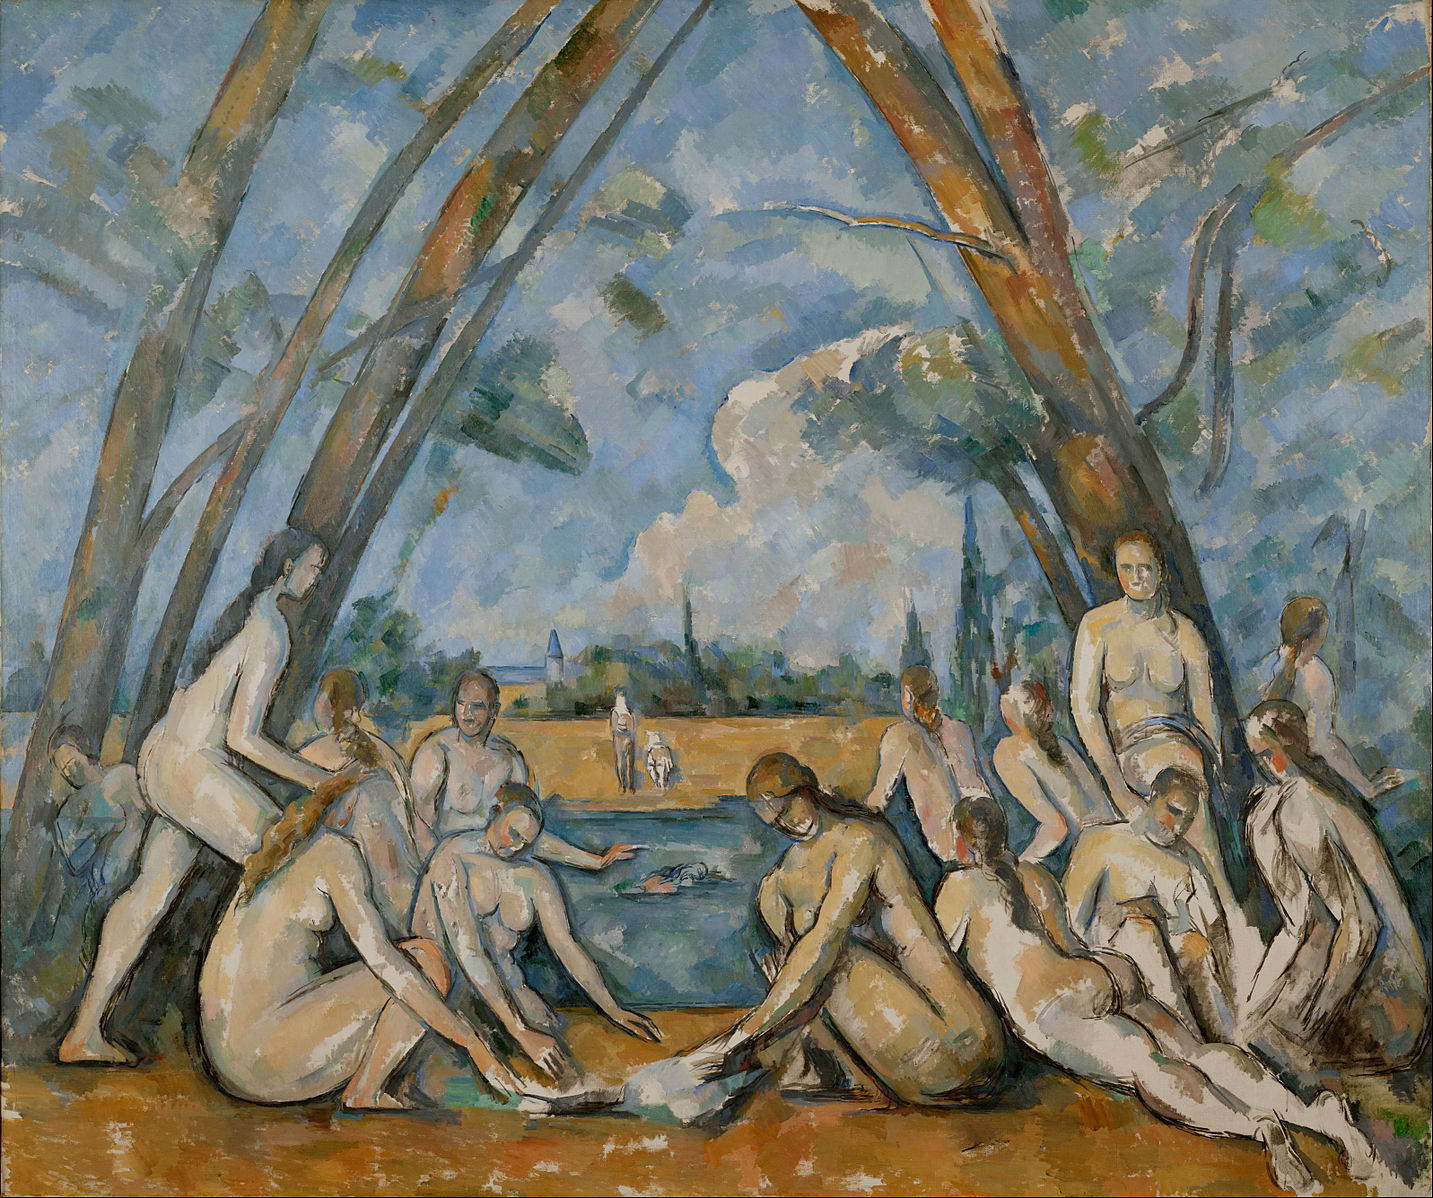 Seventeen nude people sitting on the side of a lake with tall trees